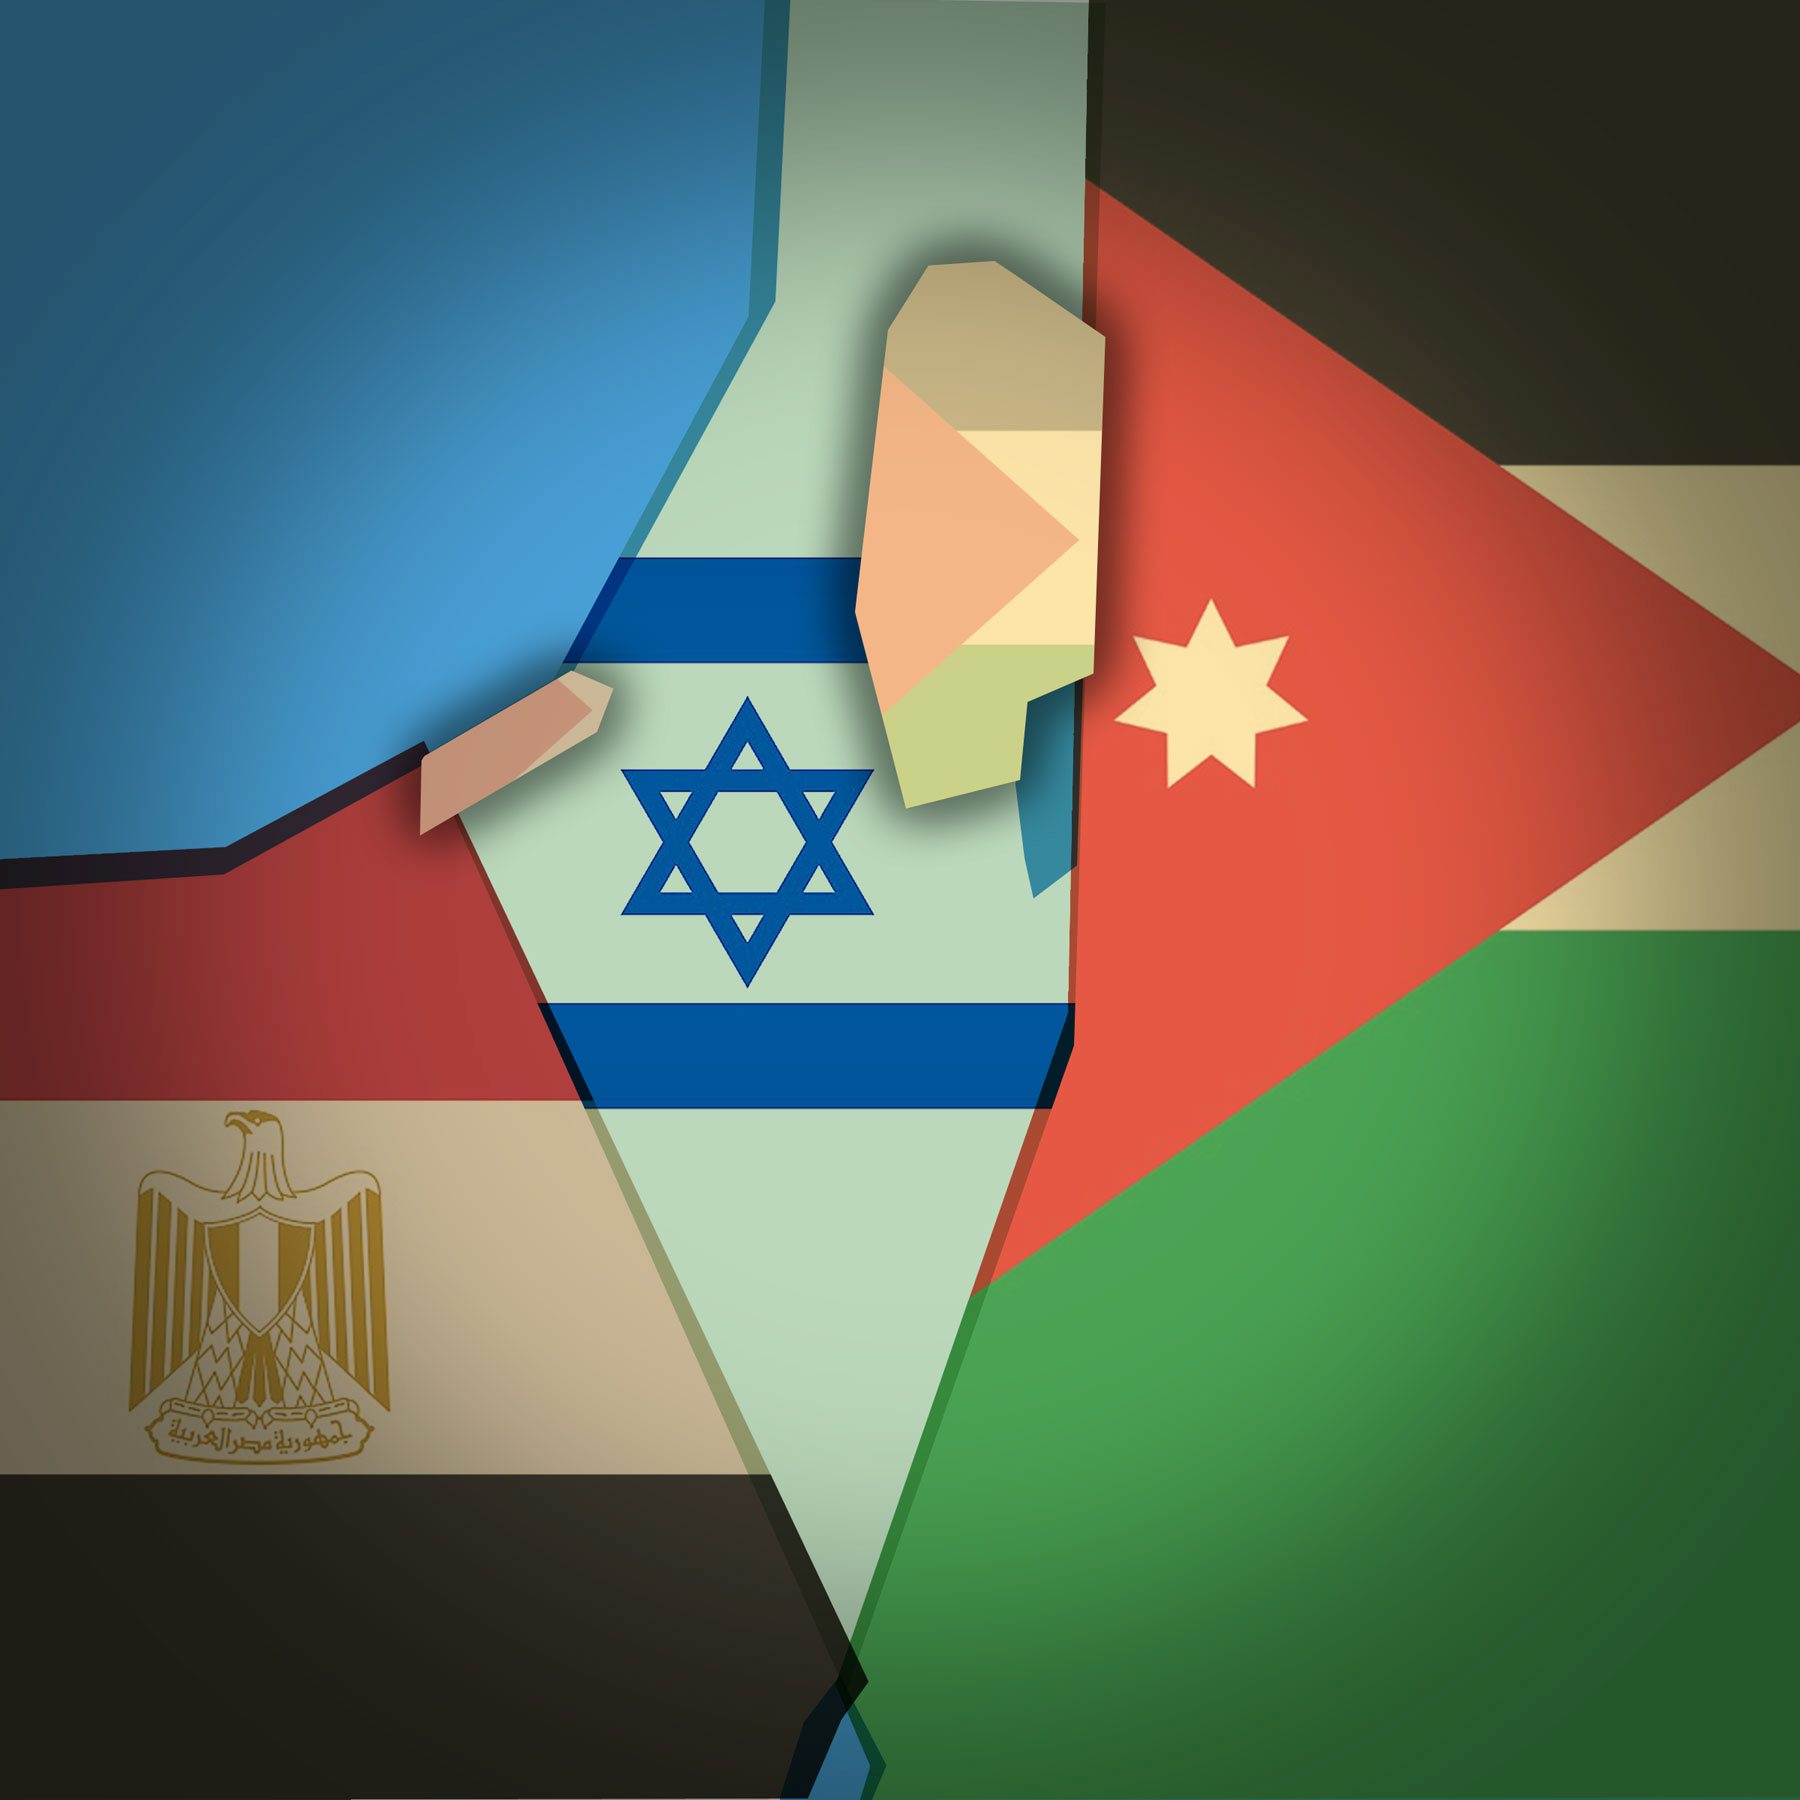 The three-state solution